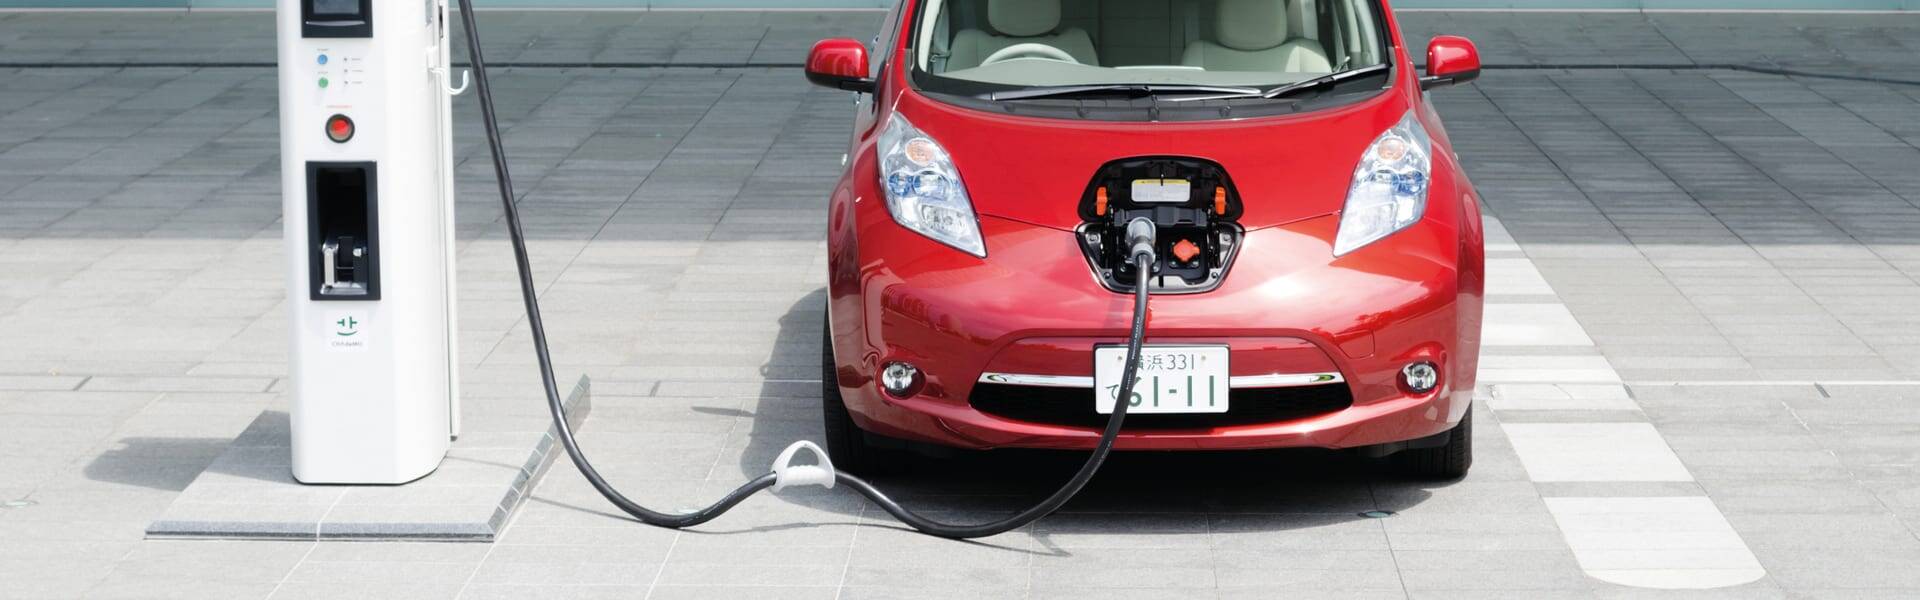 Government warned not to rely too heavily on EVs